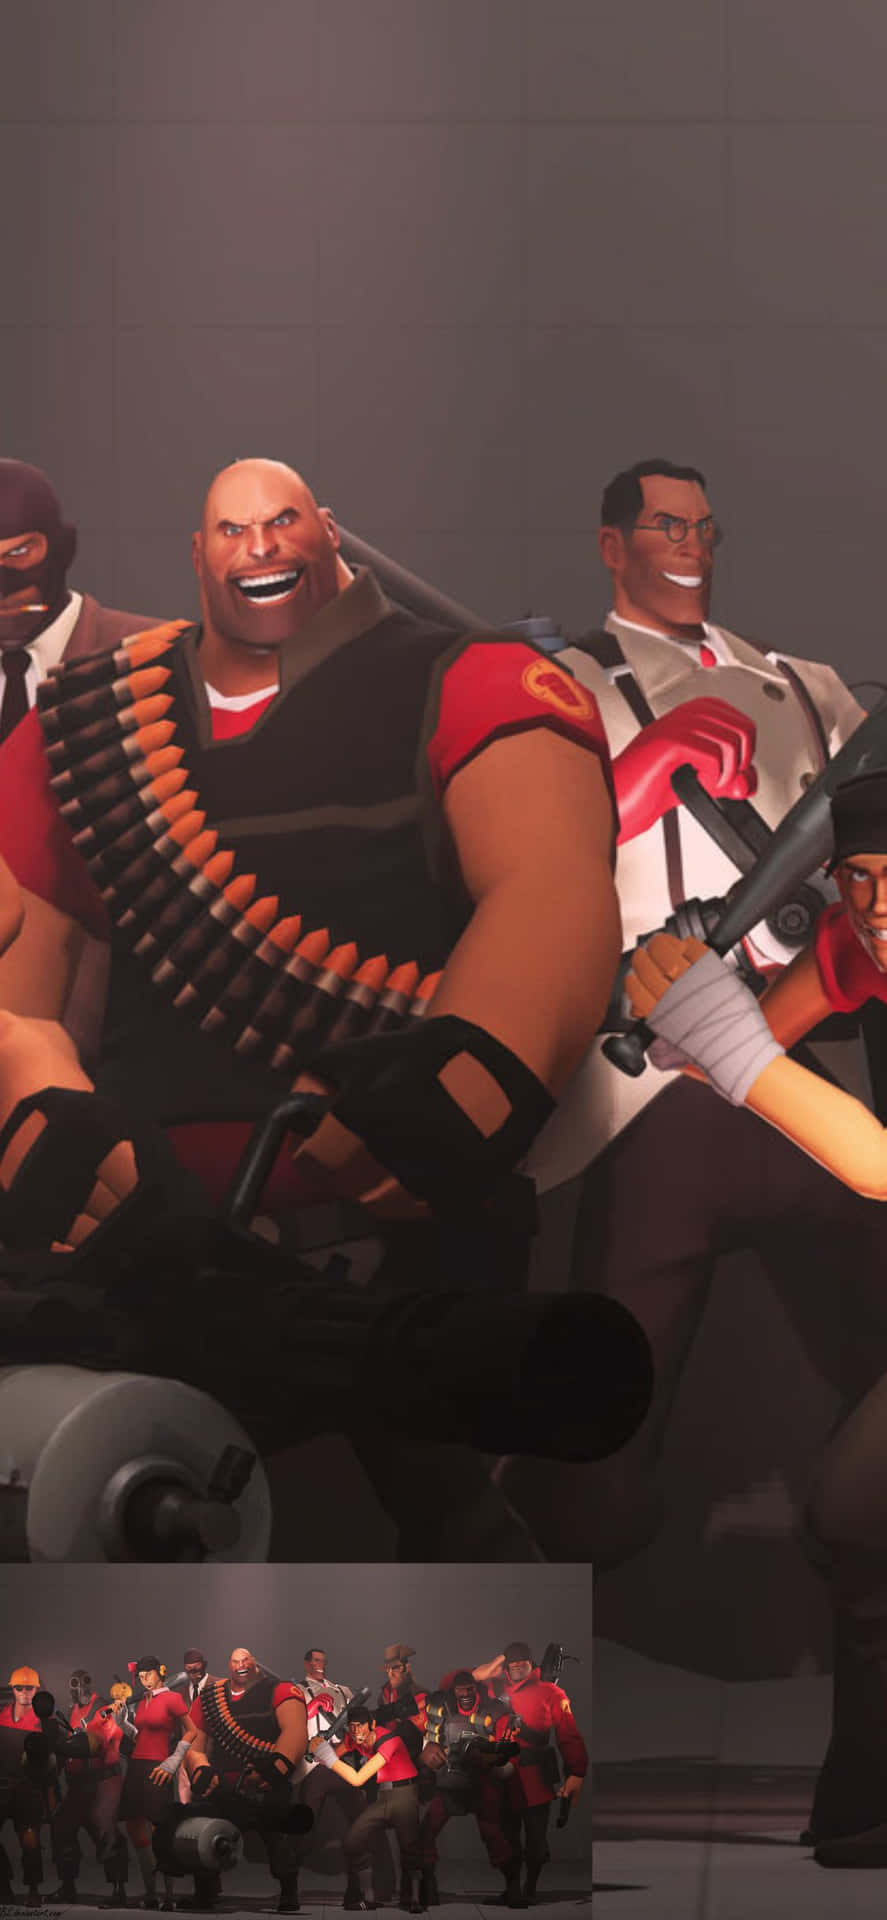 Play Team Fortress 2 on your iPhone XS